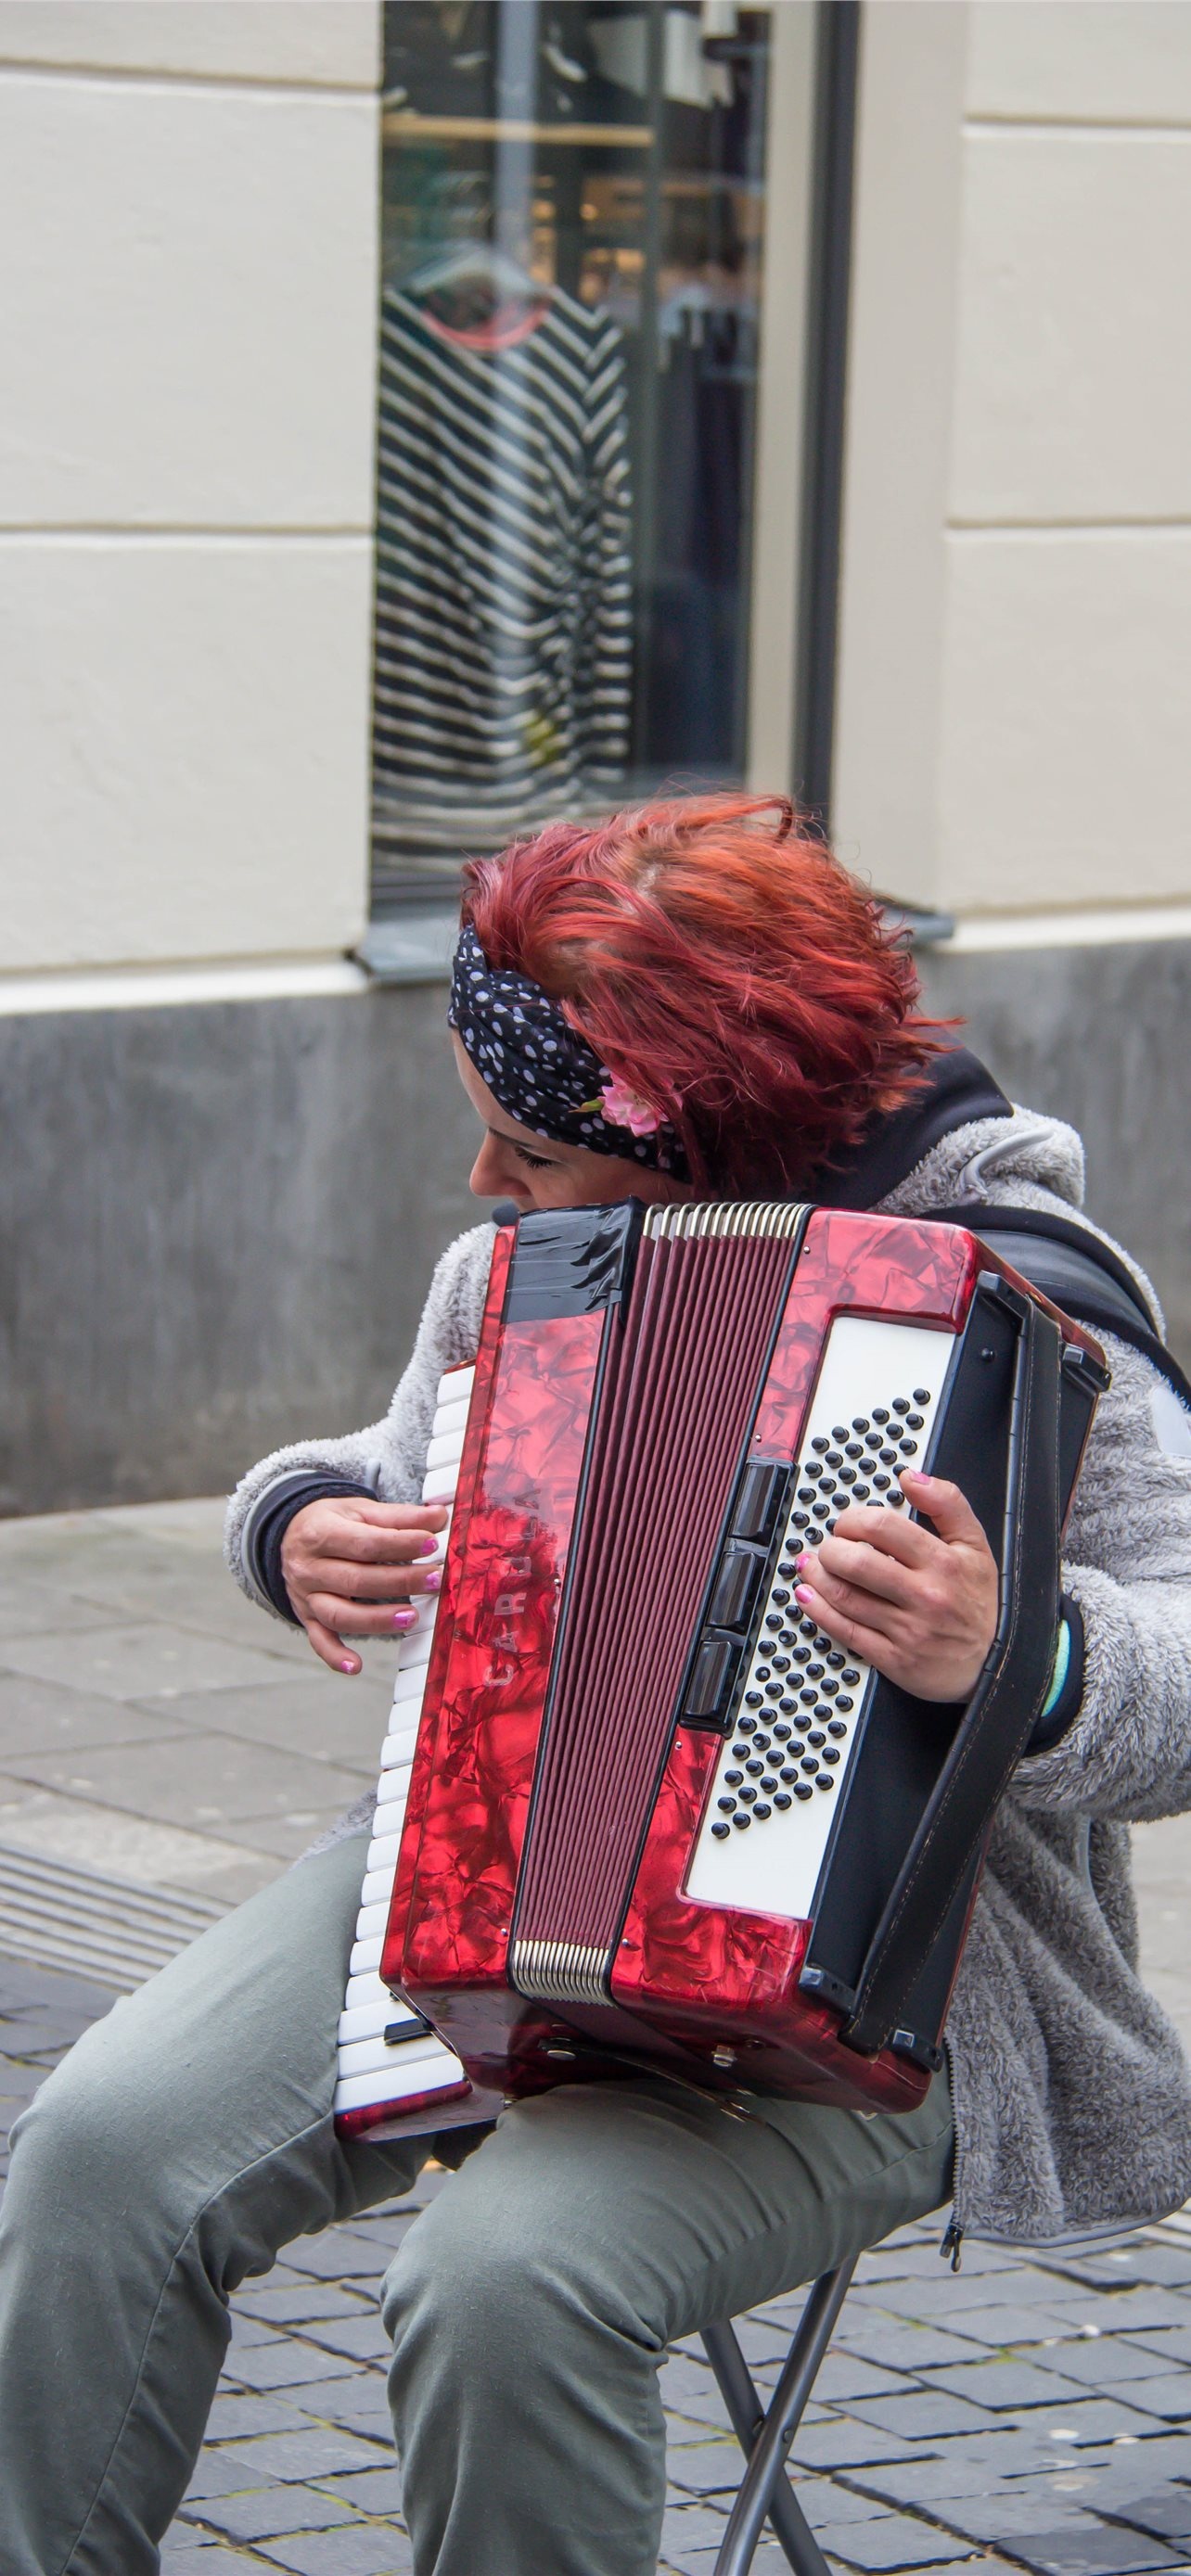 Accordion: Street musician, Playing live, Compressing and expanding the bellows. 1290x2780 HD Wallpaper.